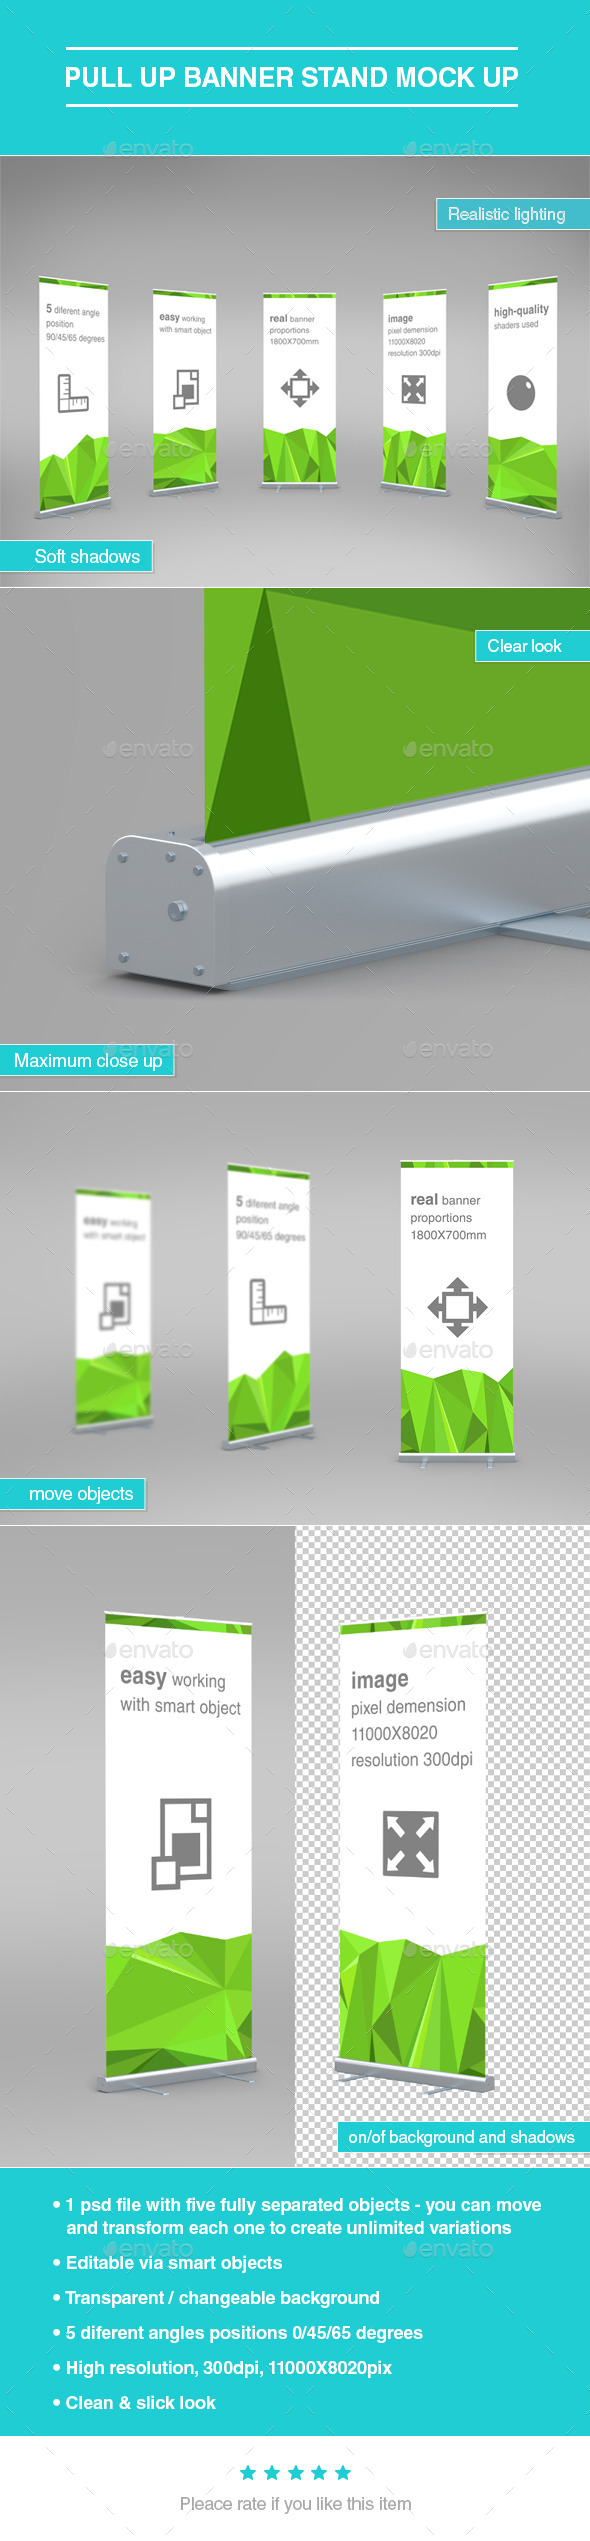 Download Pull Up Banner Stand Mock-Up - Product Mock-Ups Graphics